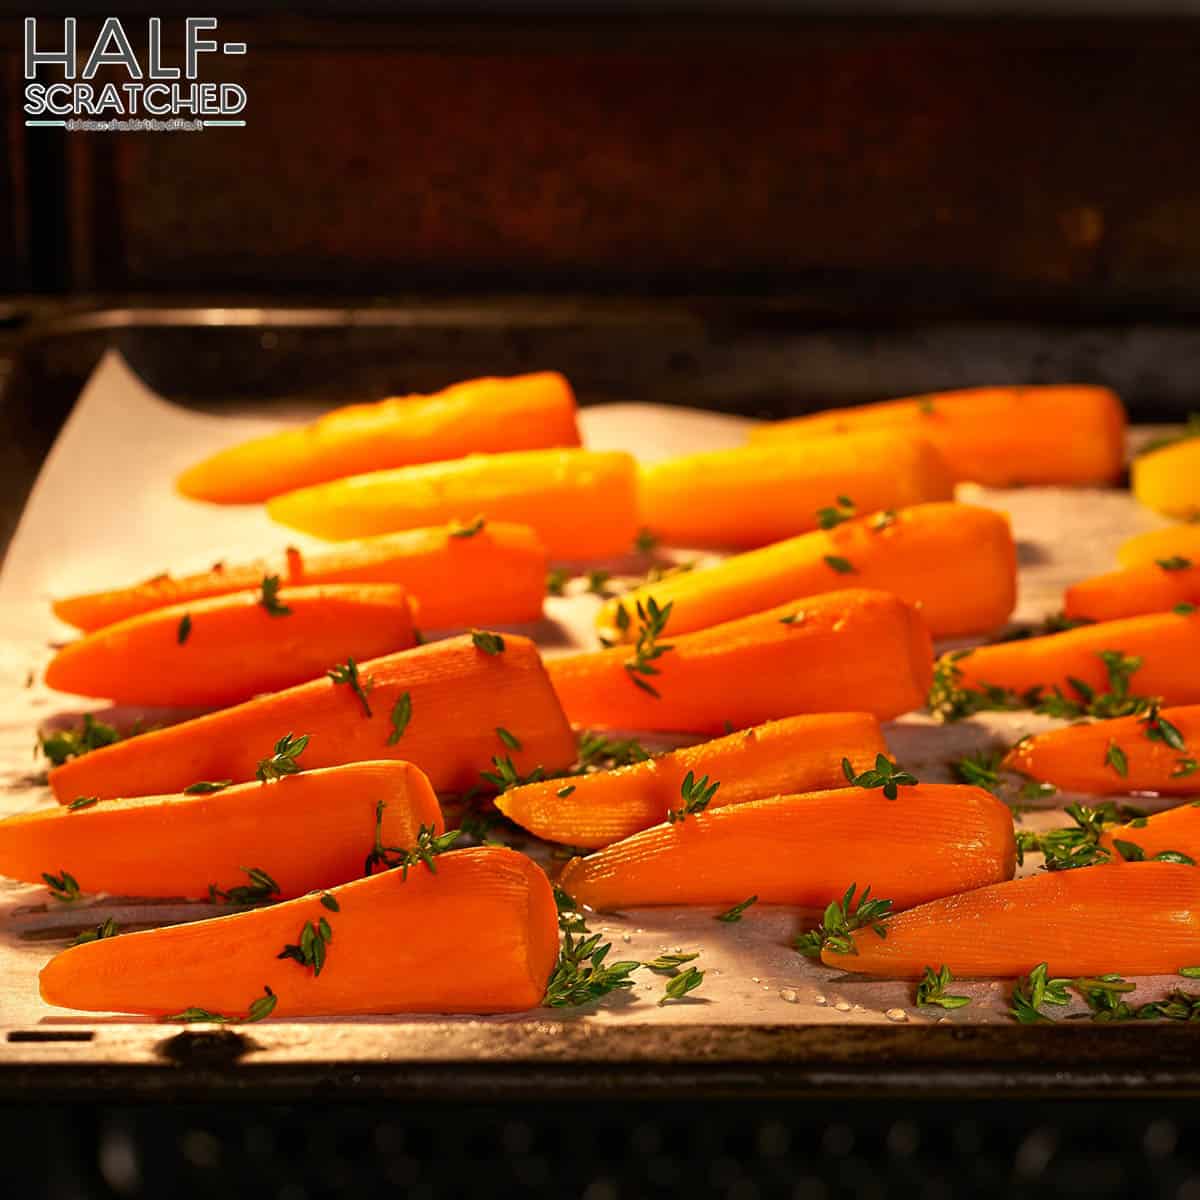 Peeled carrots in oven